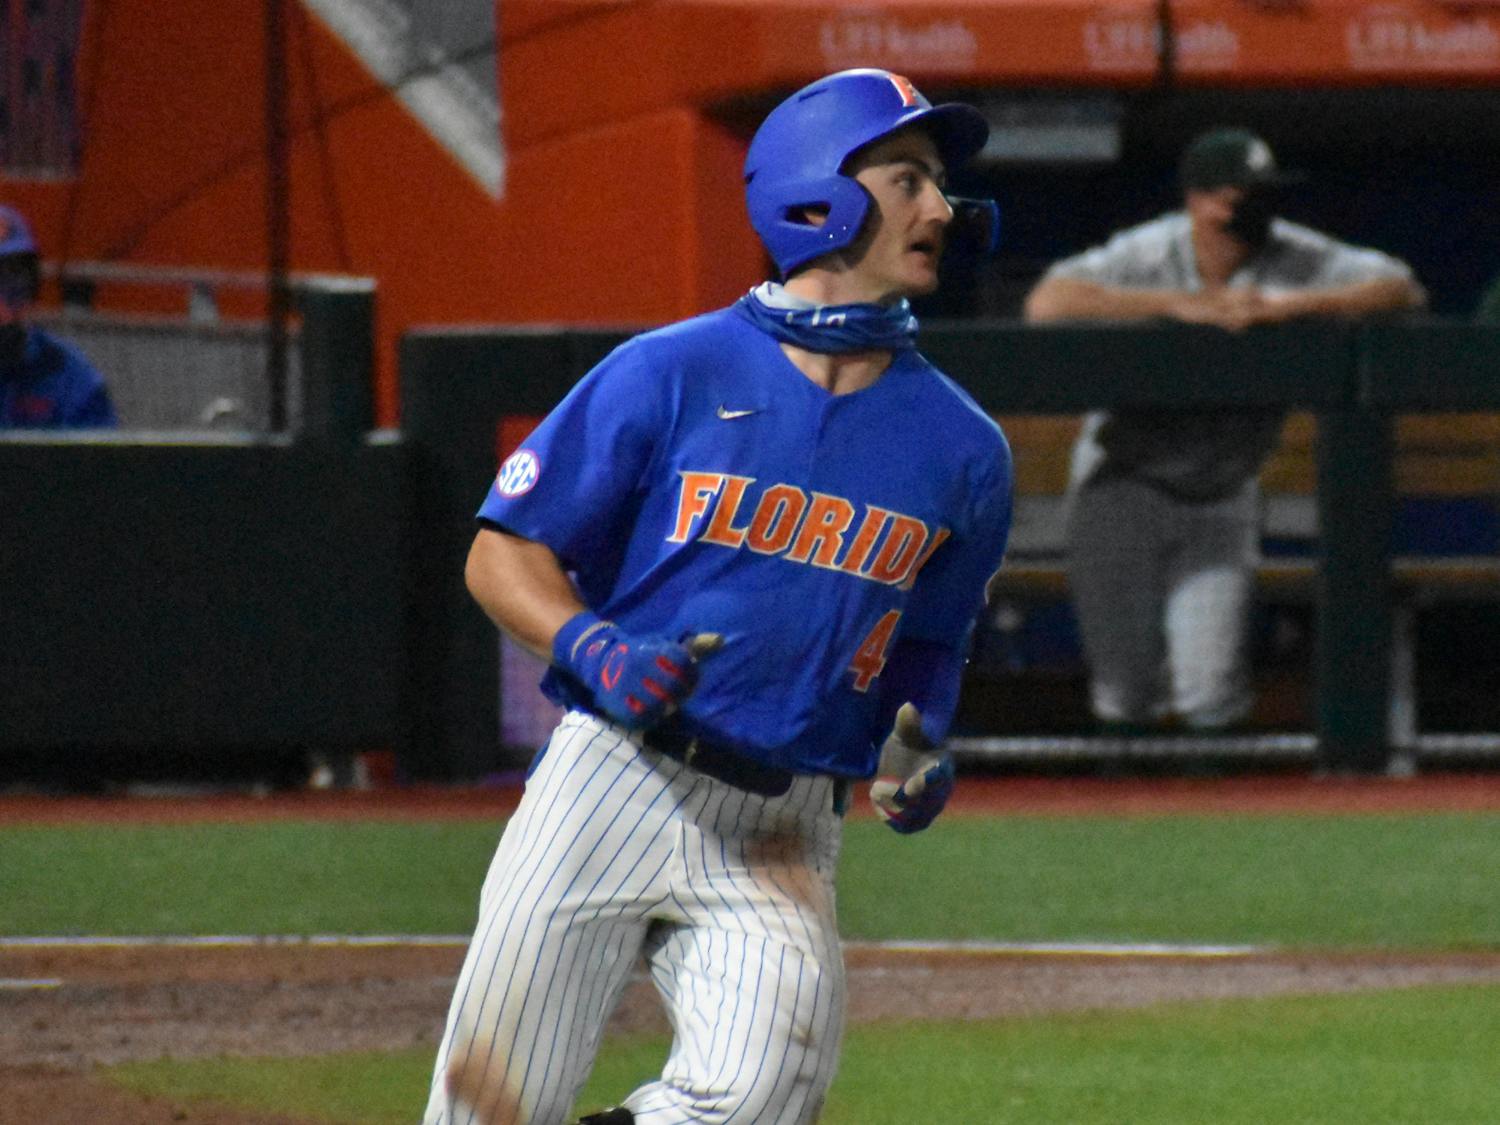 Jud Fabian rounds second base in a game against Jacksonville. March 2021. He passed Mike Zunino for fifth all-time in home runs during his career at UF on Tuesday against Stetson.